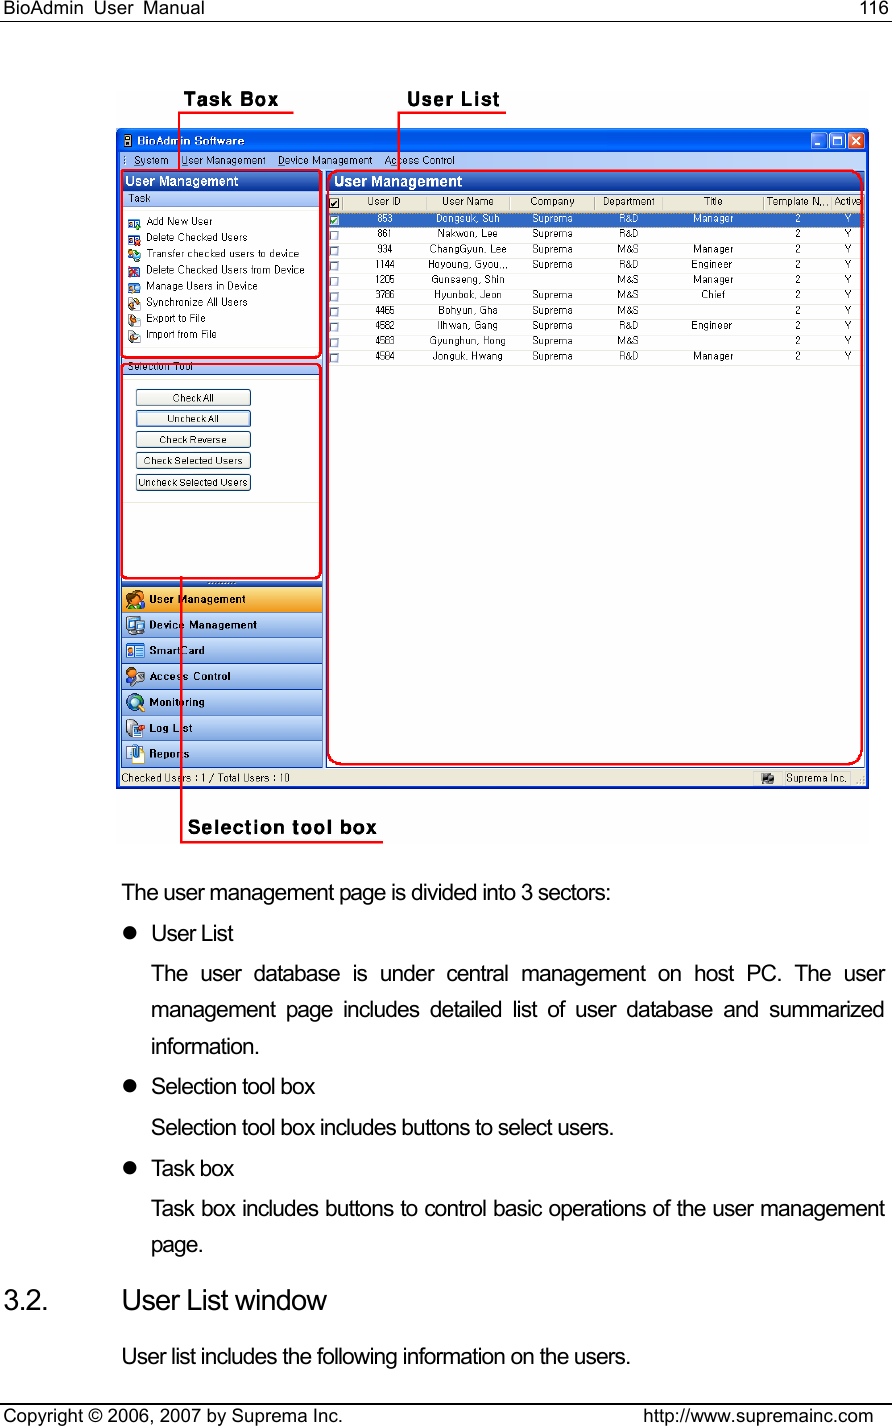 BioAdmin User Manual                                                                     116   Copyright © 2006, 2007 by Suprema Inc.                                http://www.supremainc.com  The user management page is divided into 3 sectors: z User List The user database is under central management on host PC. The user management page includes detailed list of user database and summarized information. z  Selection tool box Selection tool box includes buttons to select users. z Task box Task box includes buttons to control basic operations of the user management page.  3.2.  User List window User list includes the following information on the users. 